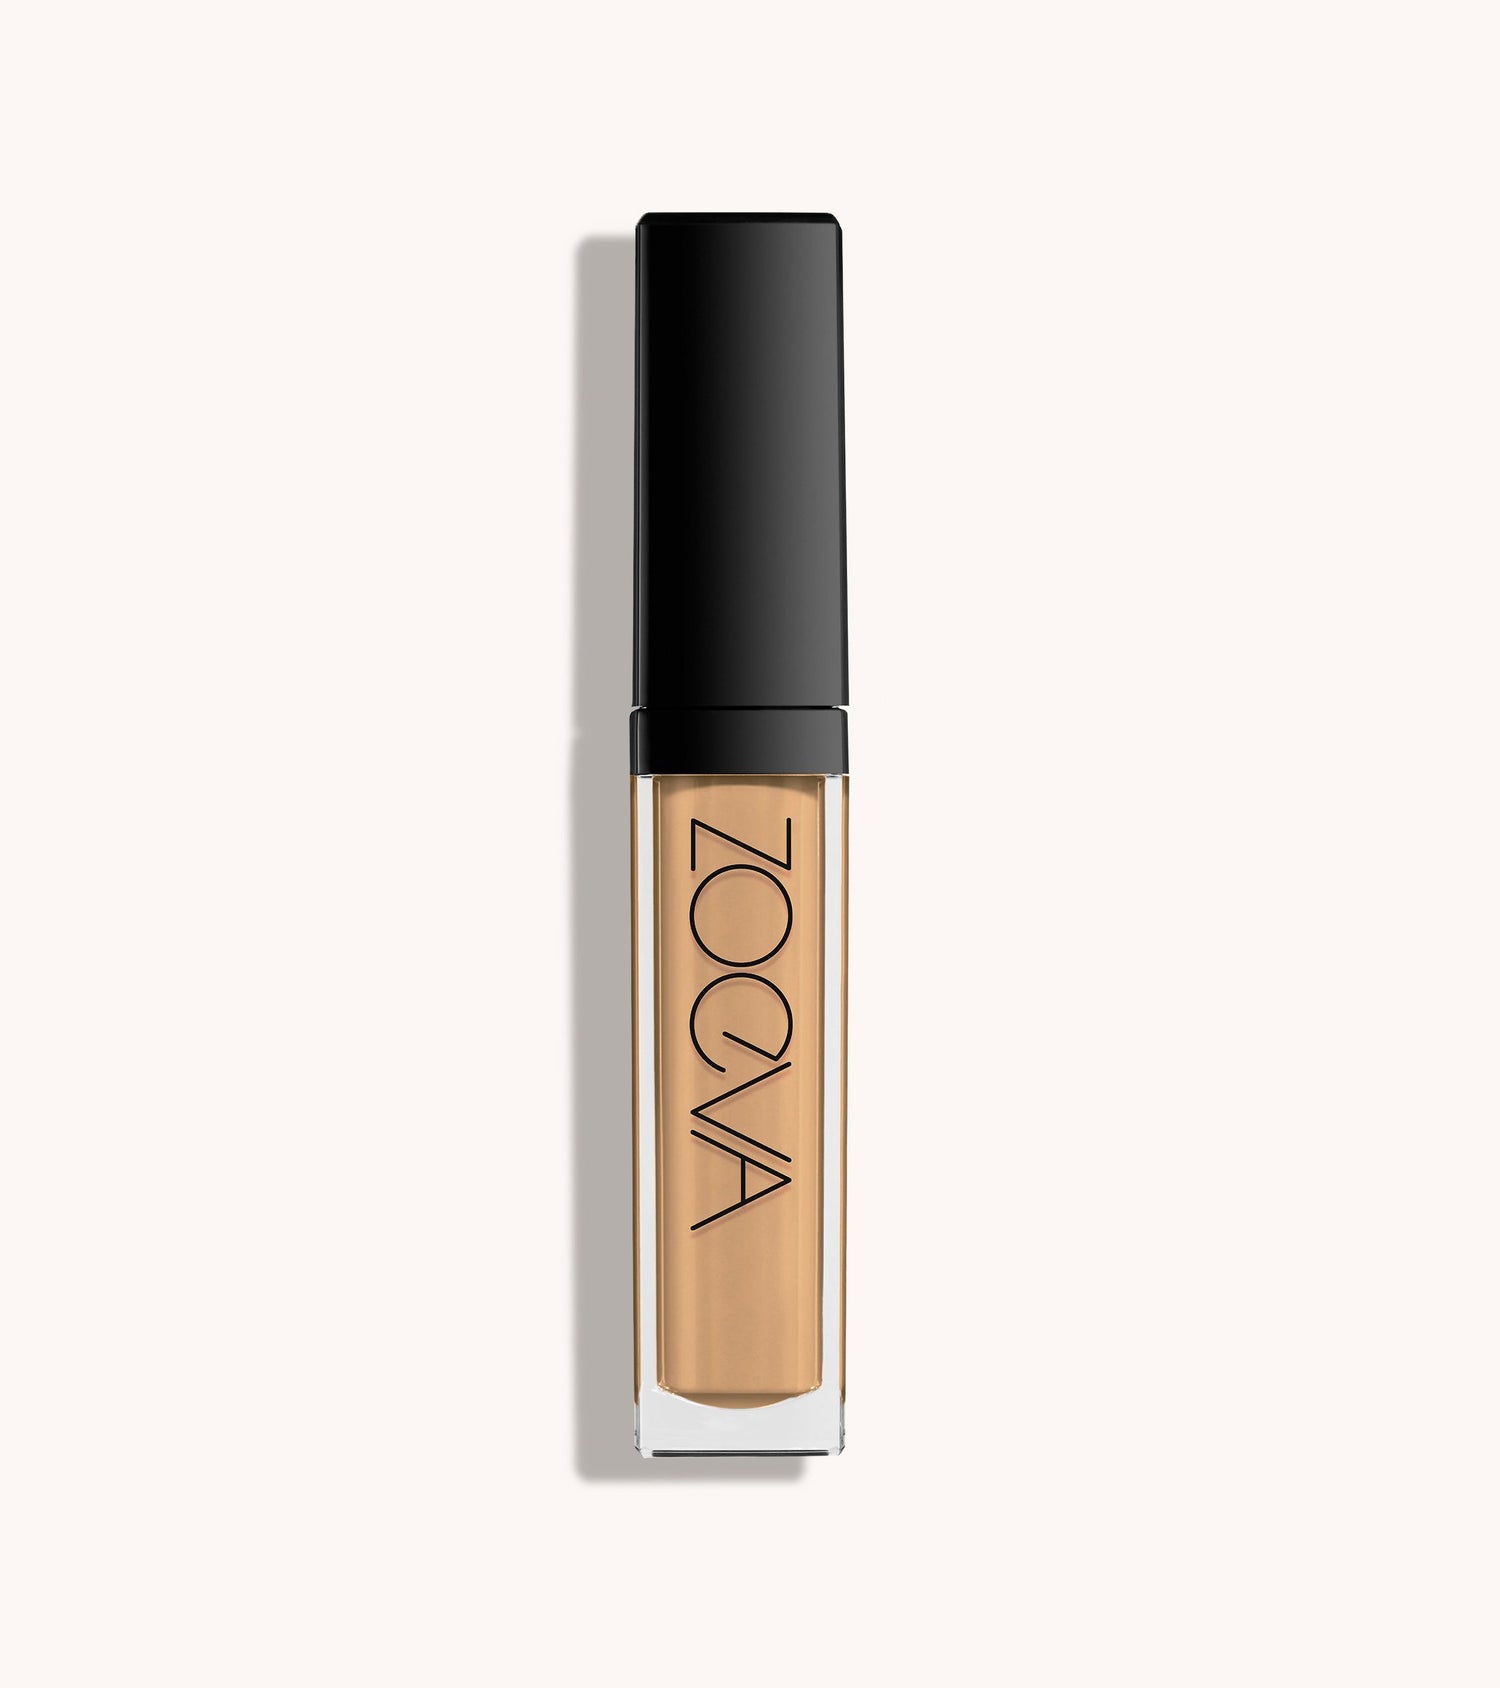 Authentik Skin Perfector Concealer (130 For Real) Main Image 1